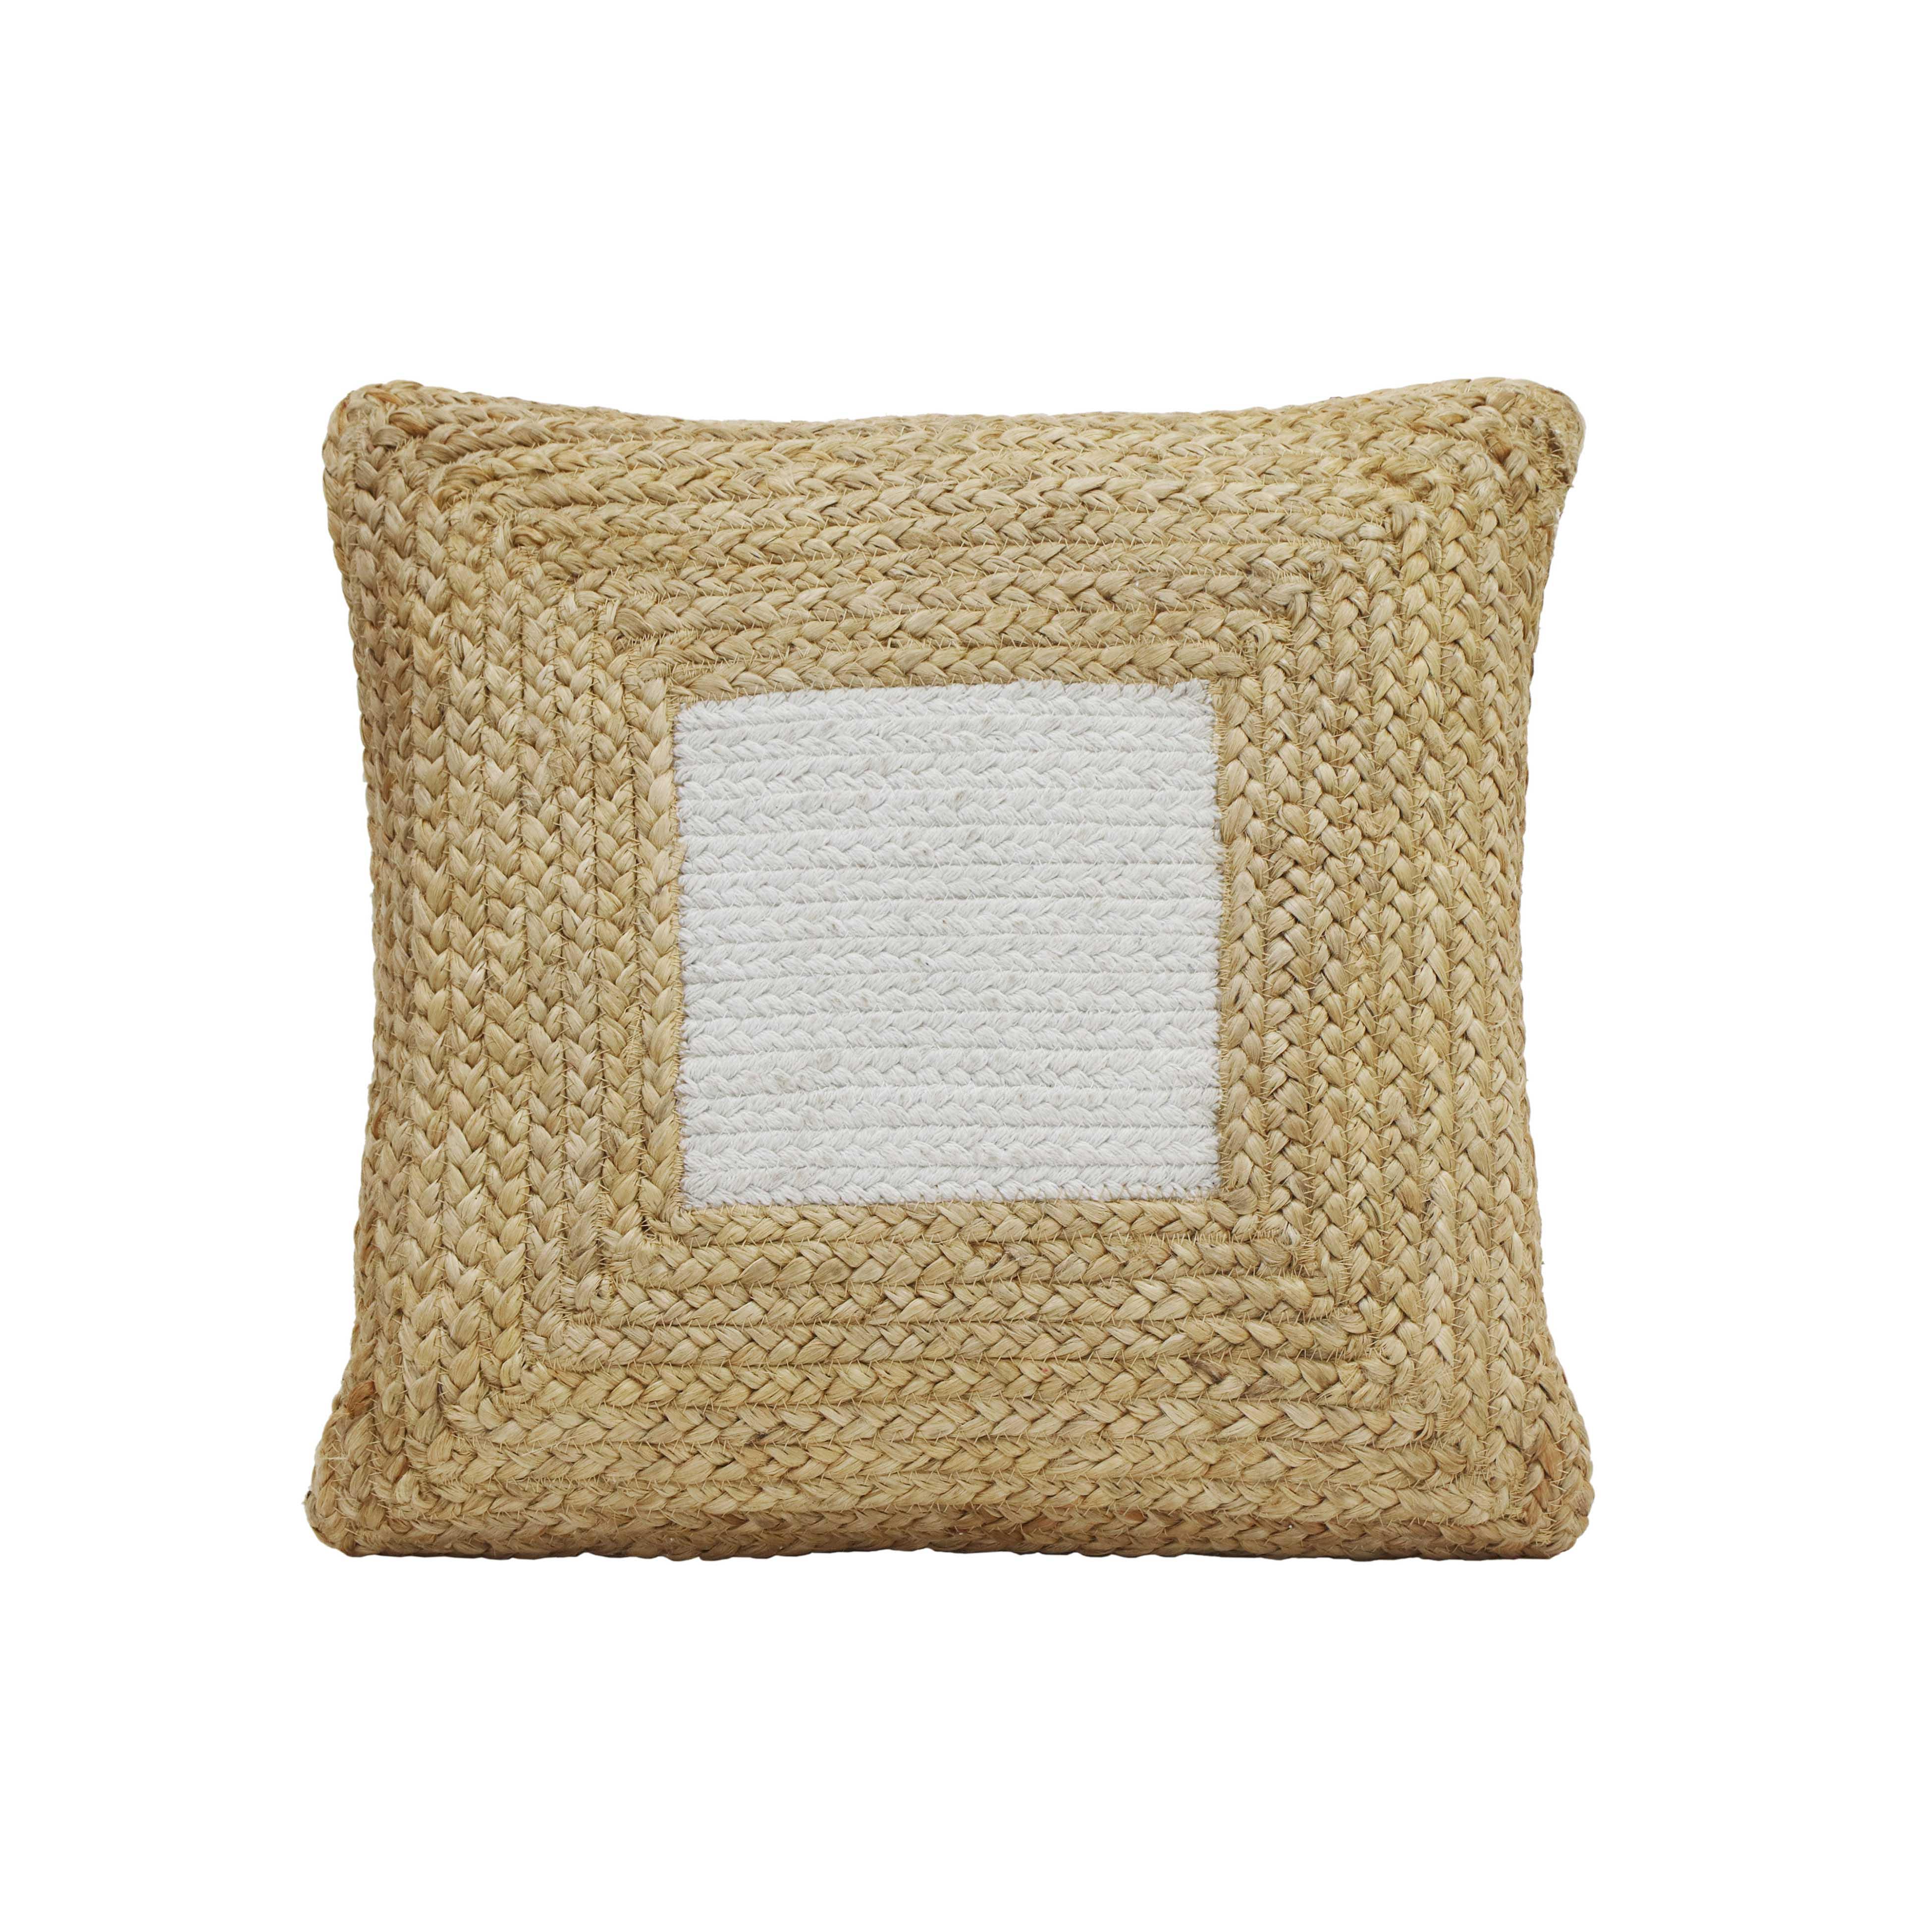 Tov Furniture Pillows - Blank Mind White Square Accent Pillow